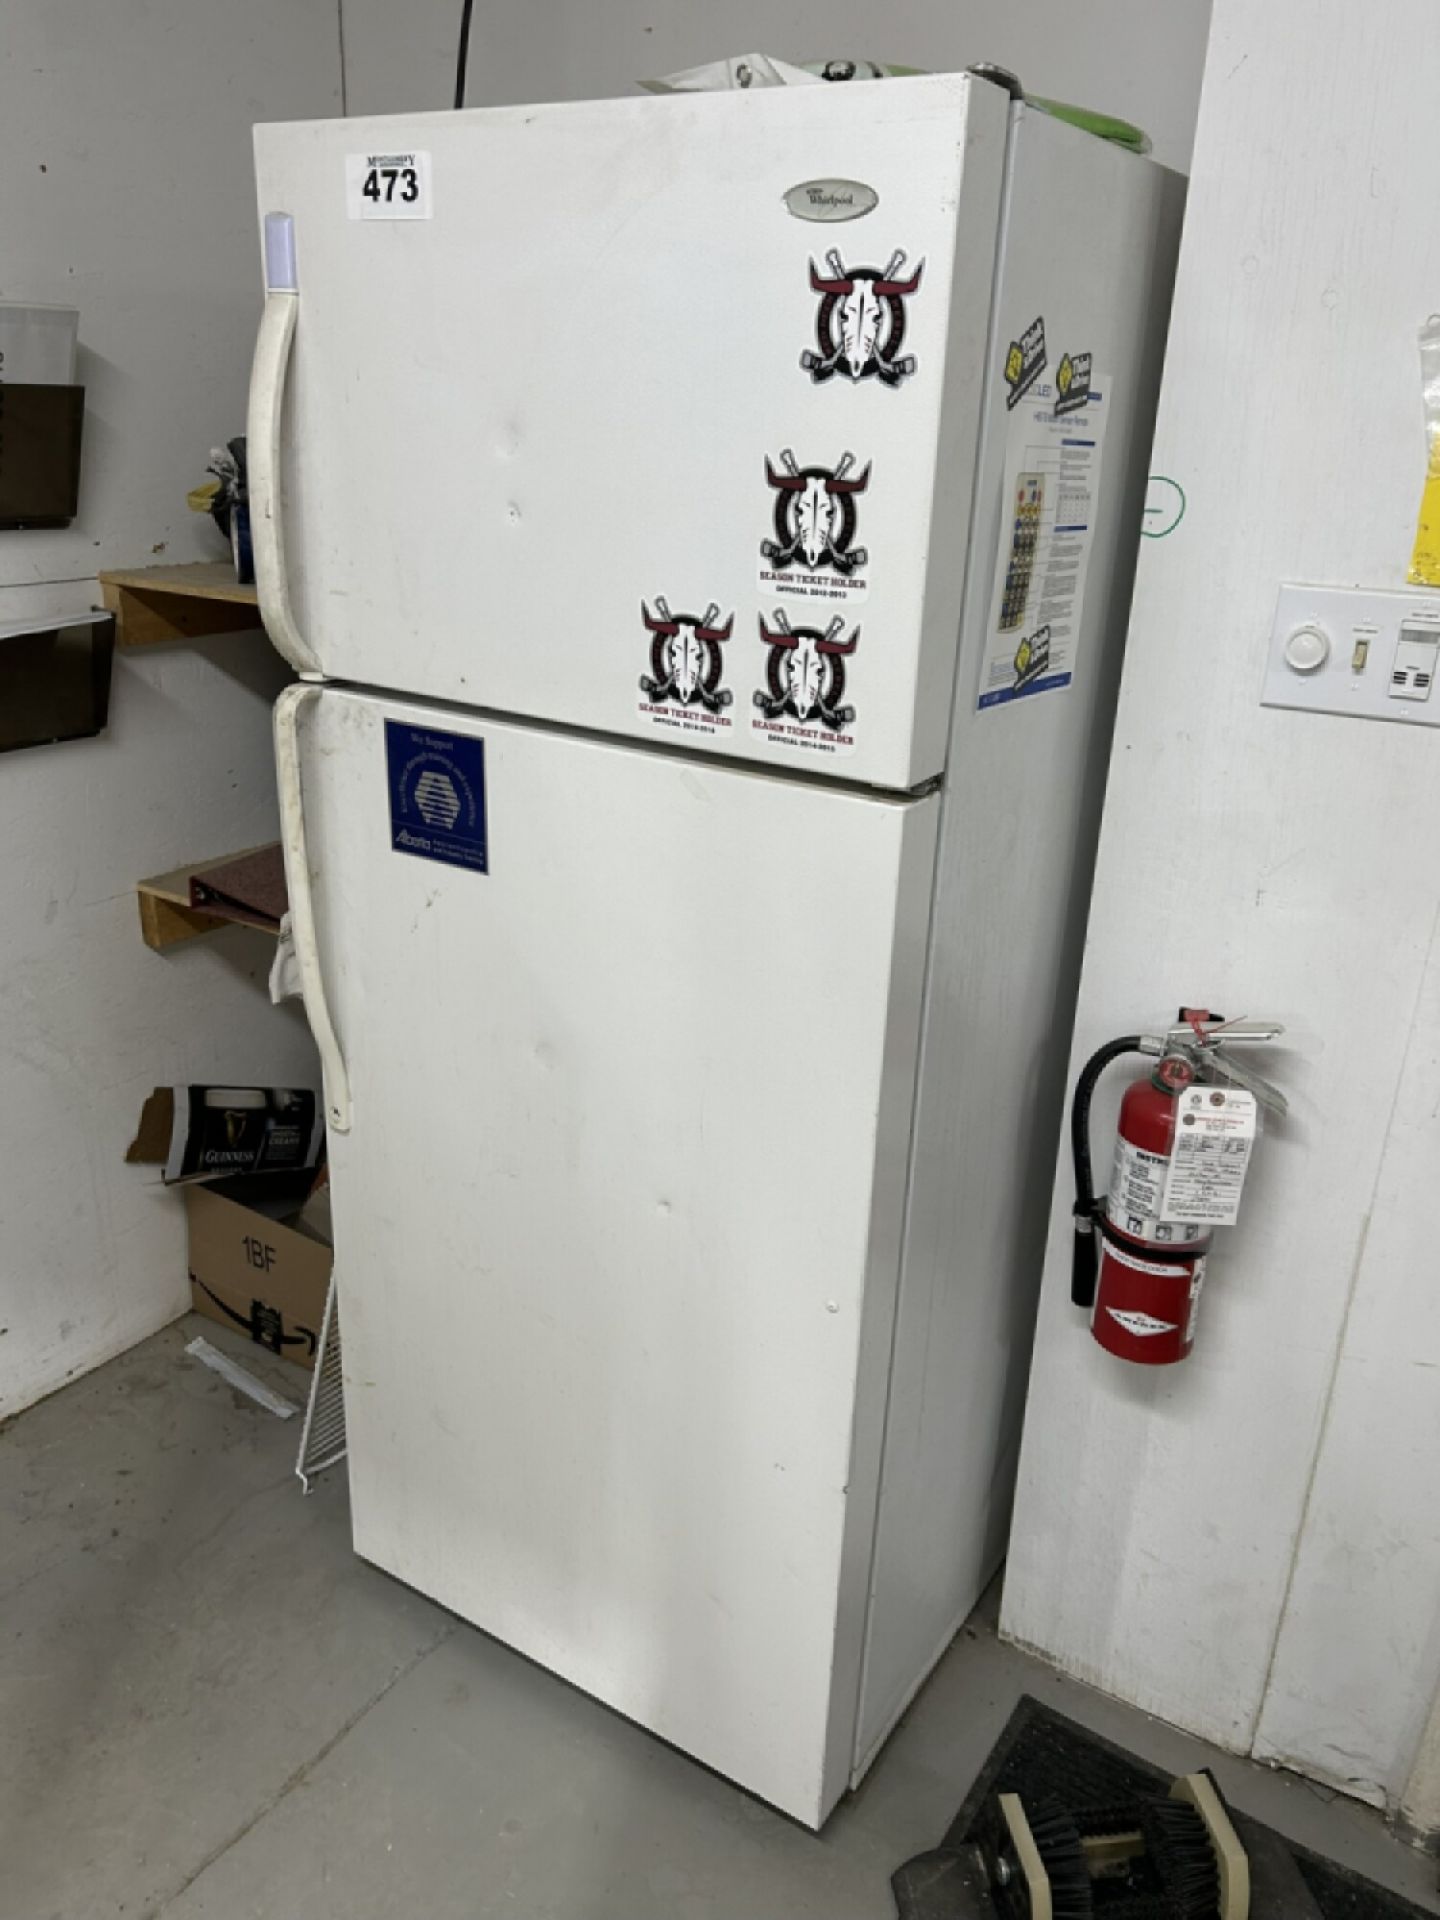 WHIRLPOOL REFRIGERATOR 28"X29"X67" (CONTENTS NOT INCLUDED) - Image 2 of 7